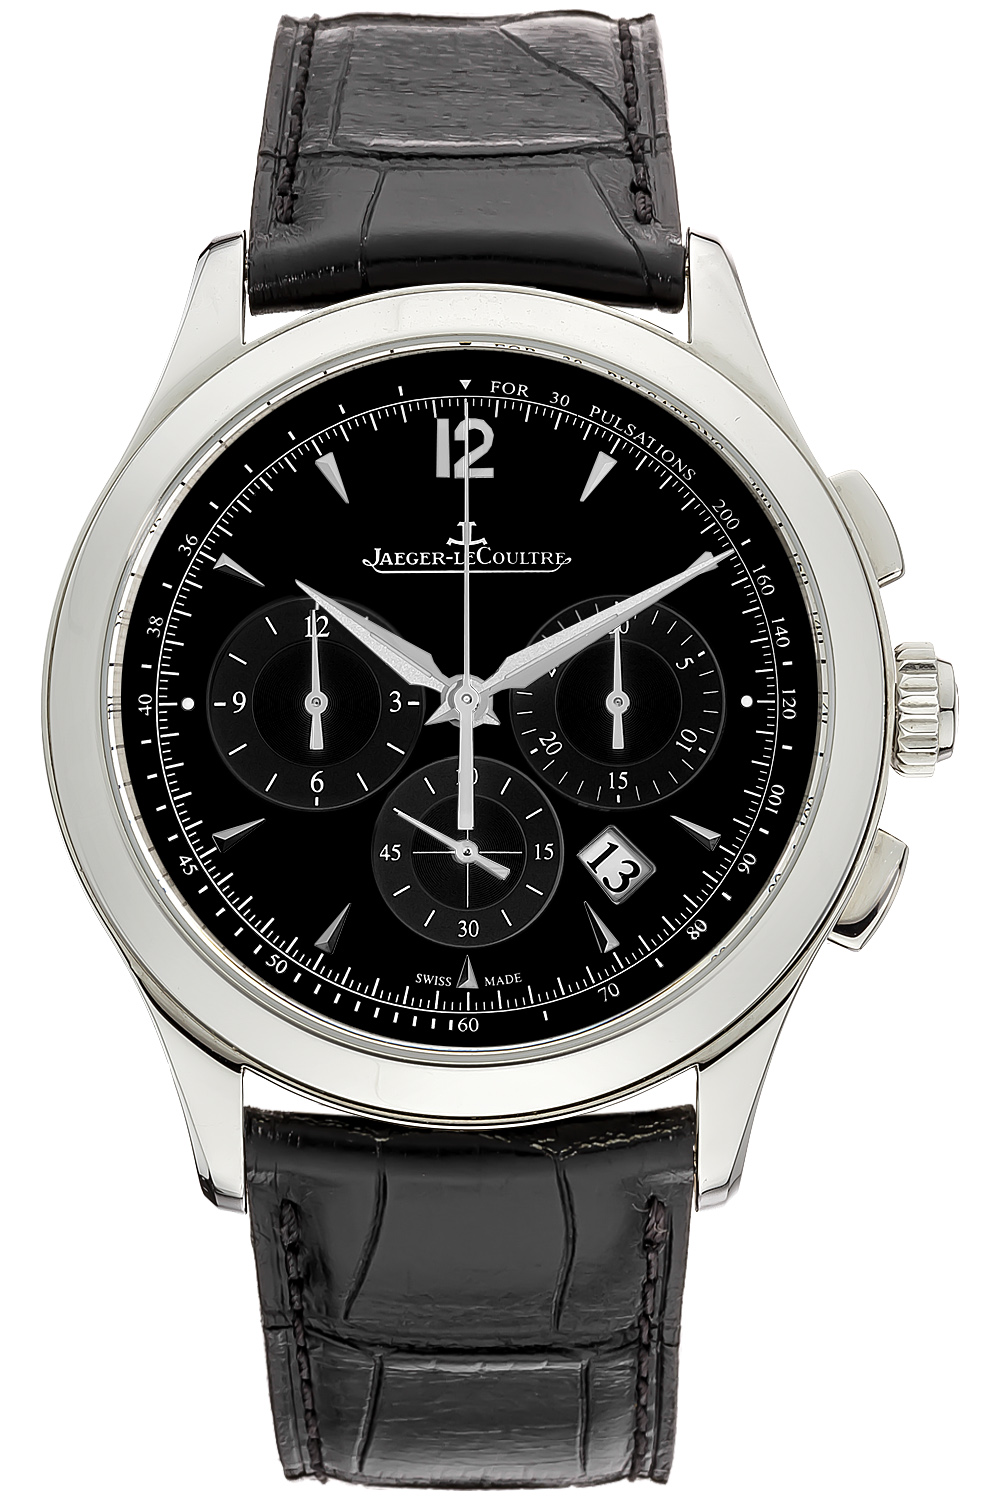 Jaeger lecoultre watch serial numbers